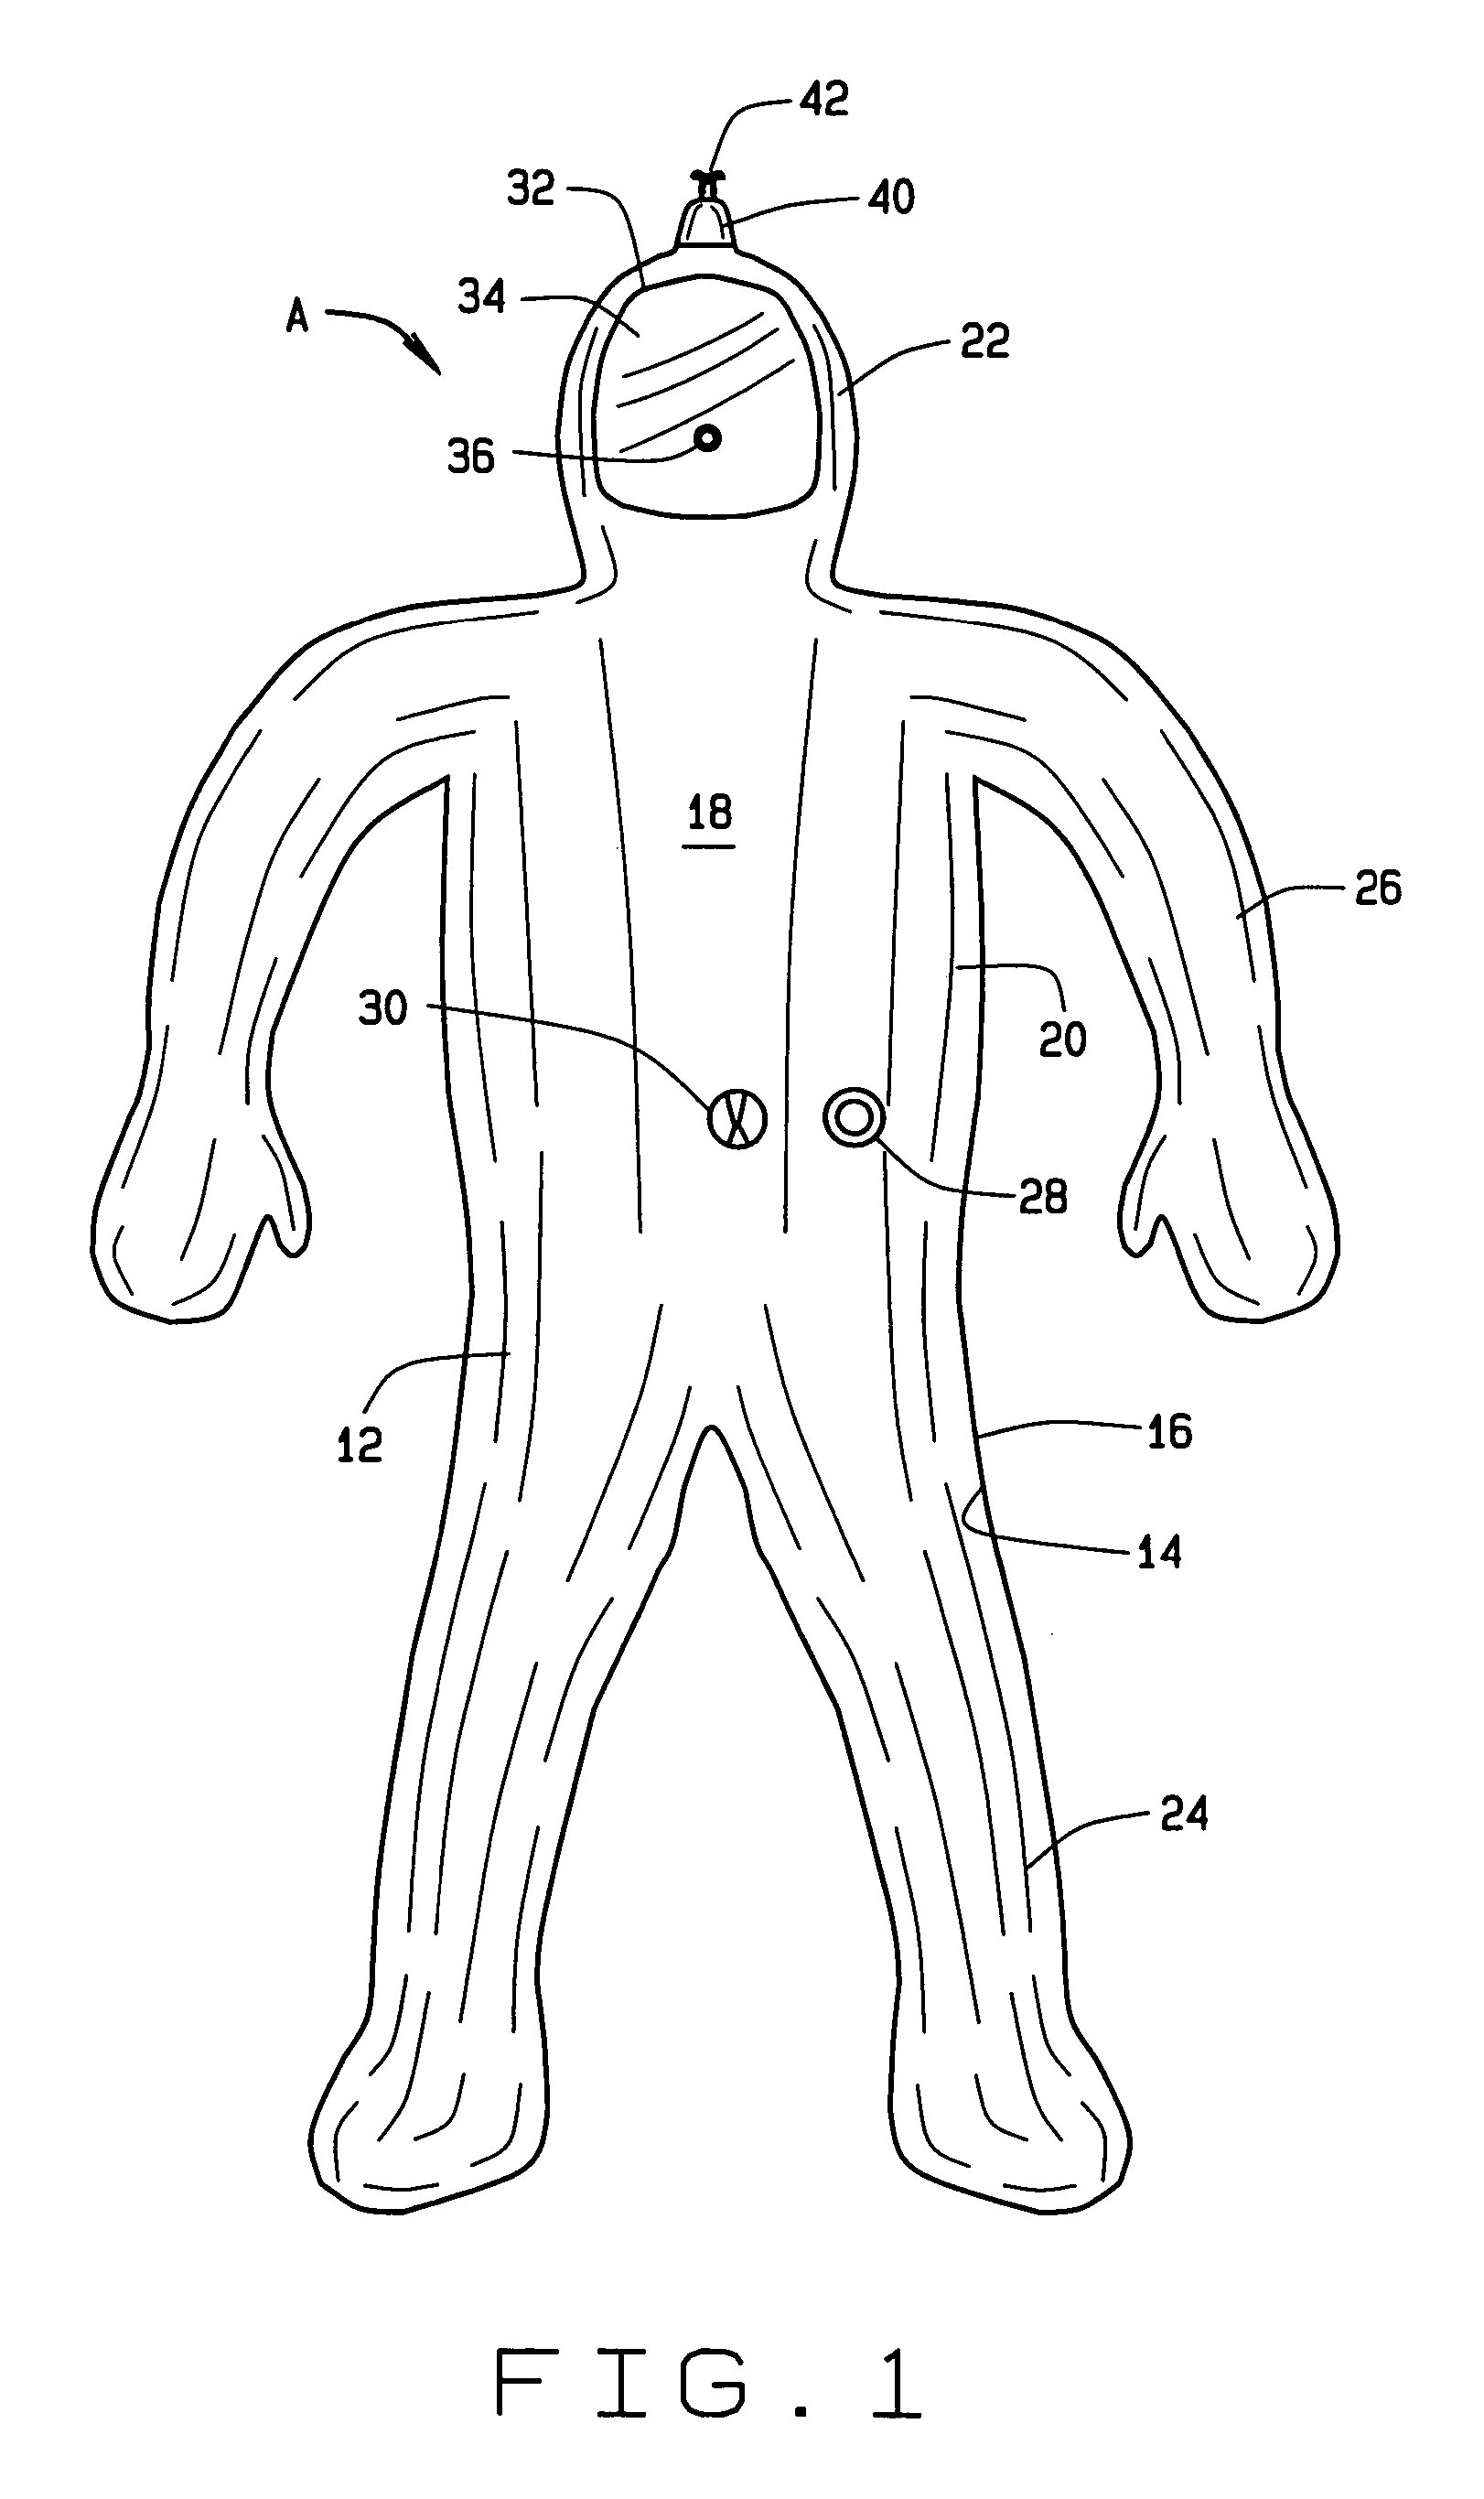 Body volume measurement apparatus and method of measuring the body volume of a person